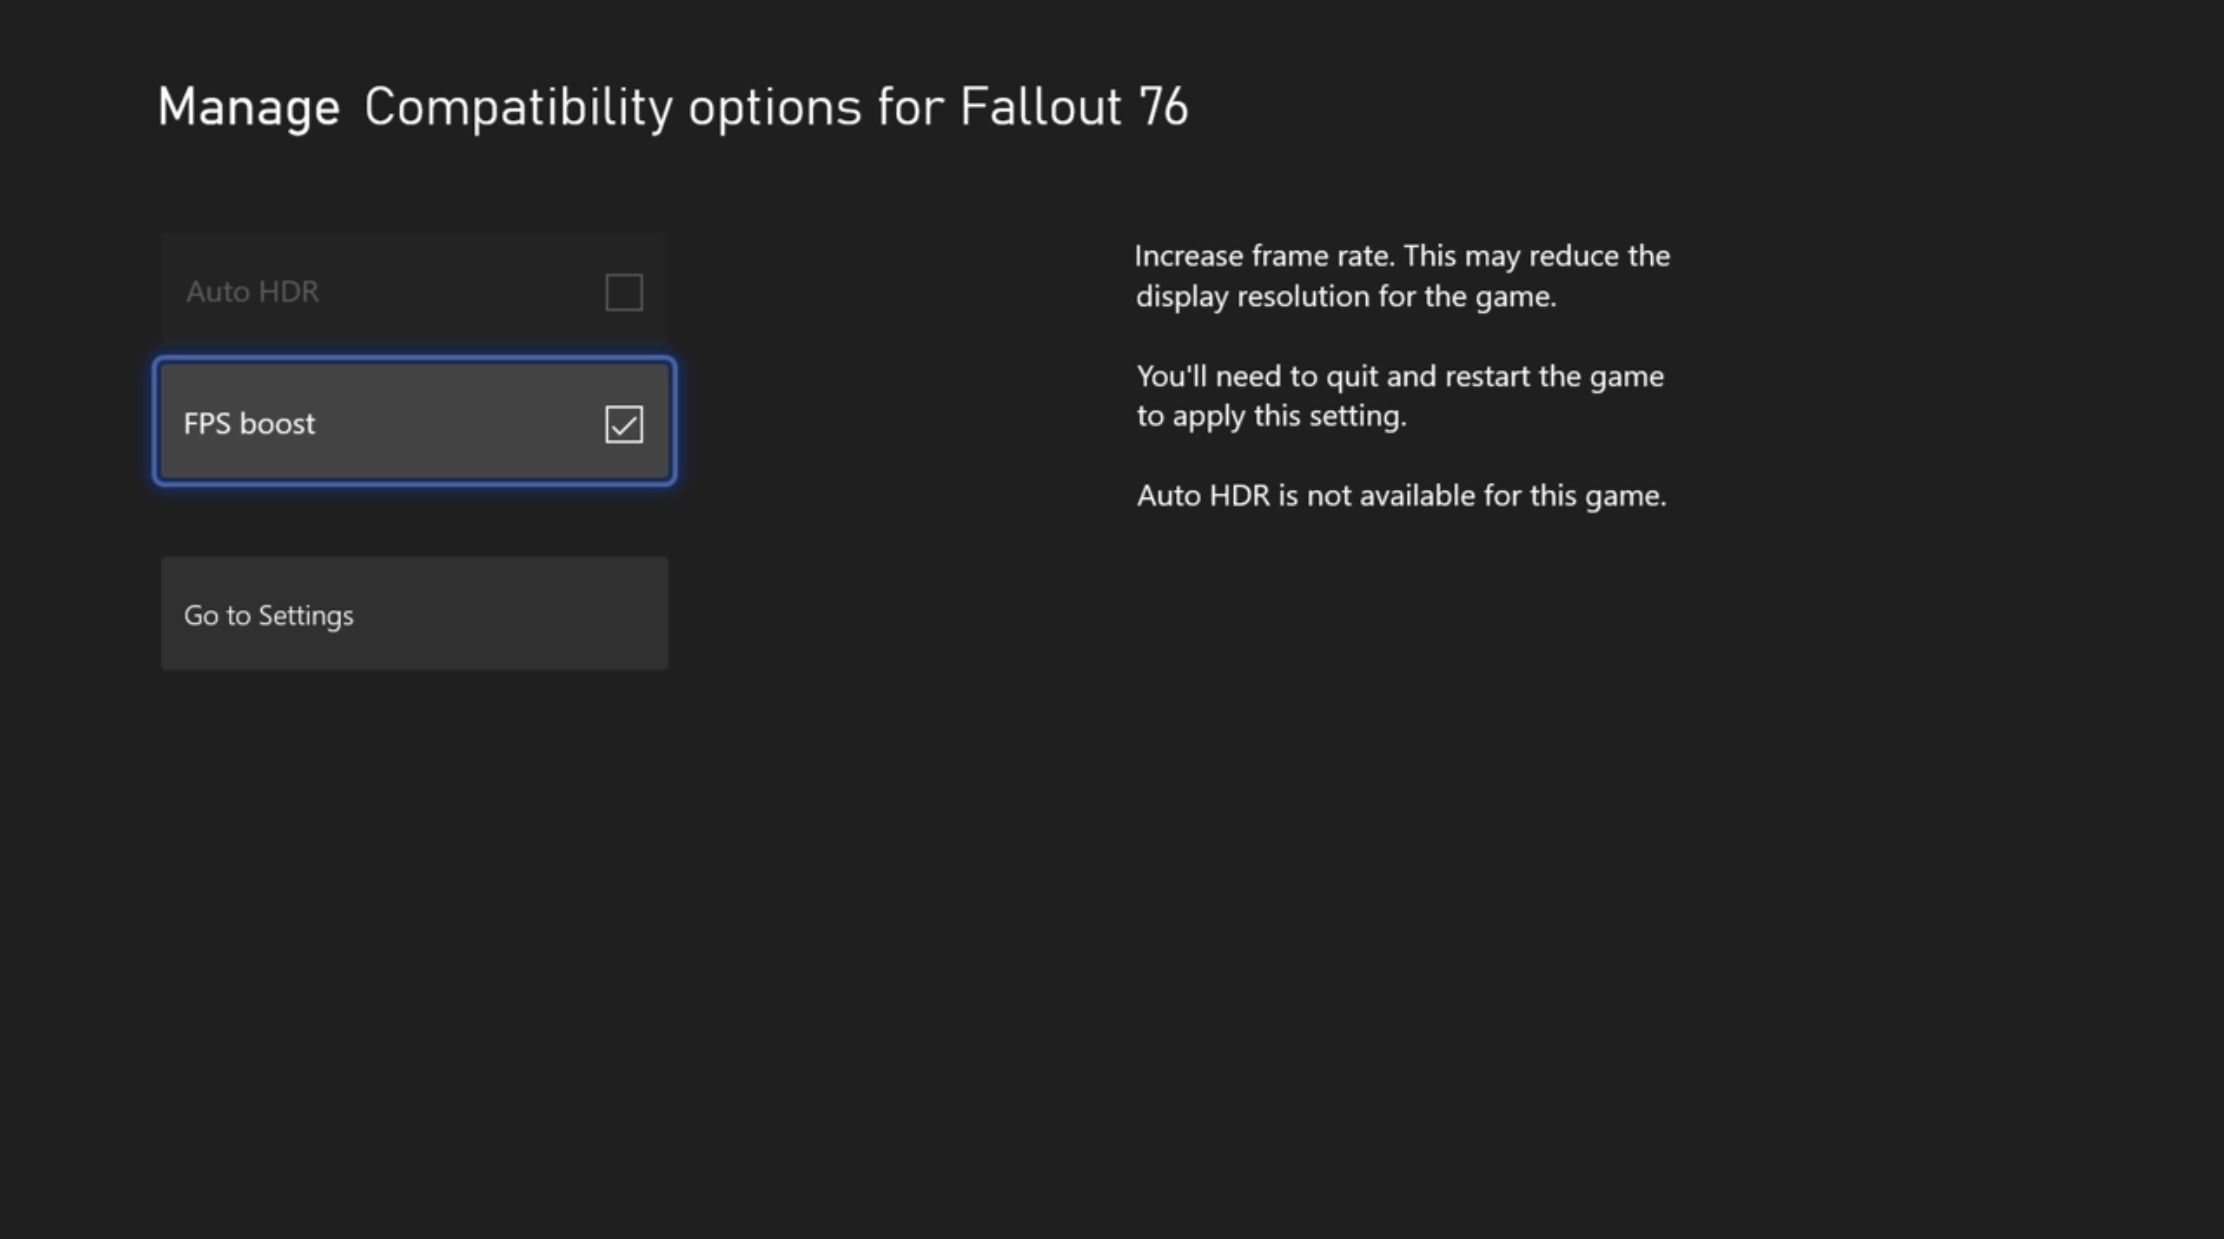 fallout 76 options list for enhancing the game